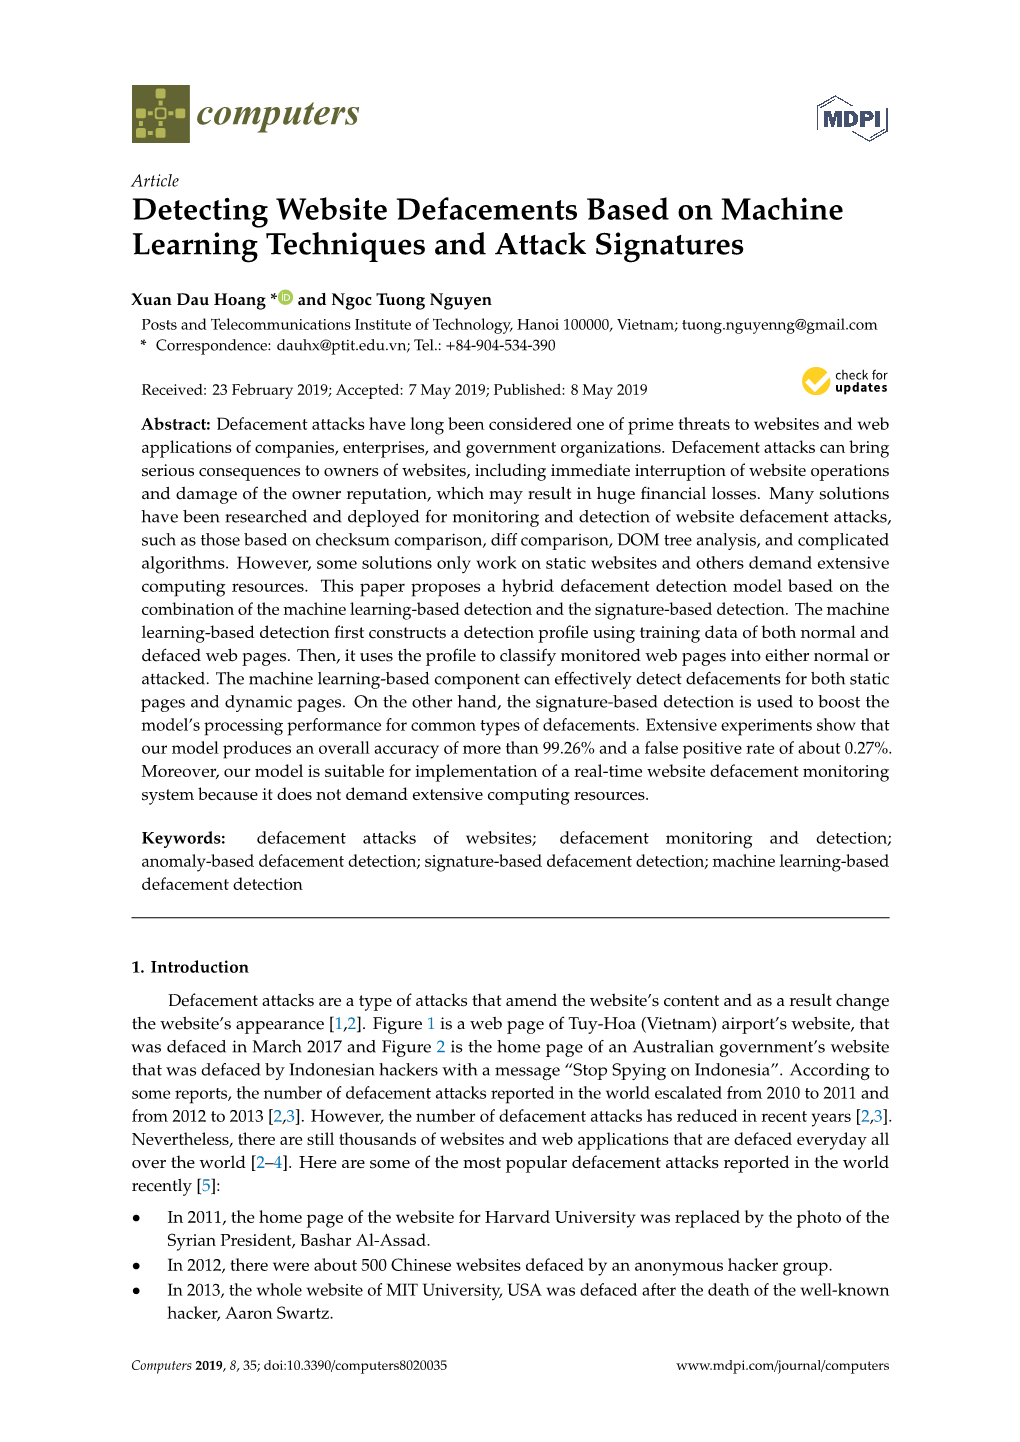 Detecting Website Defacements Based on Machine Learning Techniques and Attack Signatures